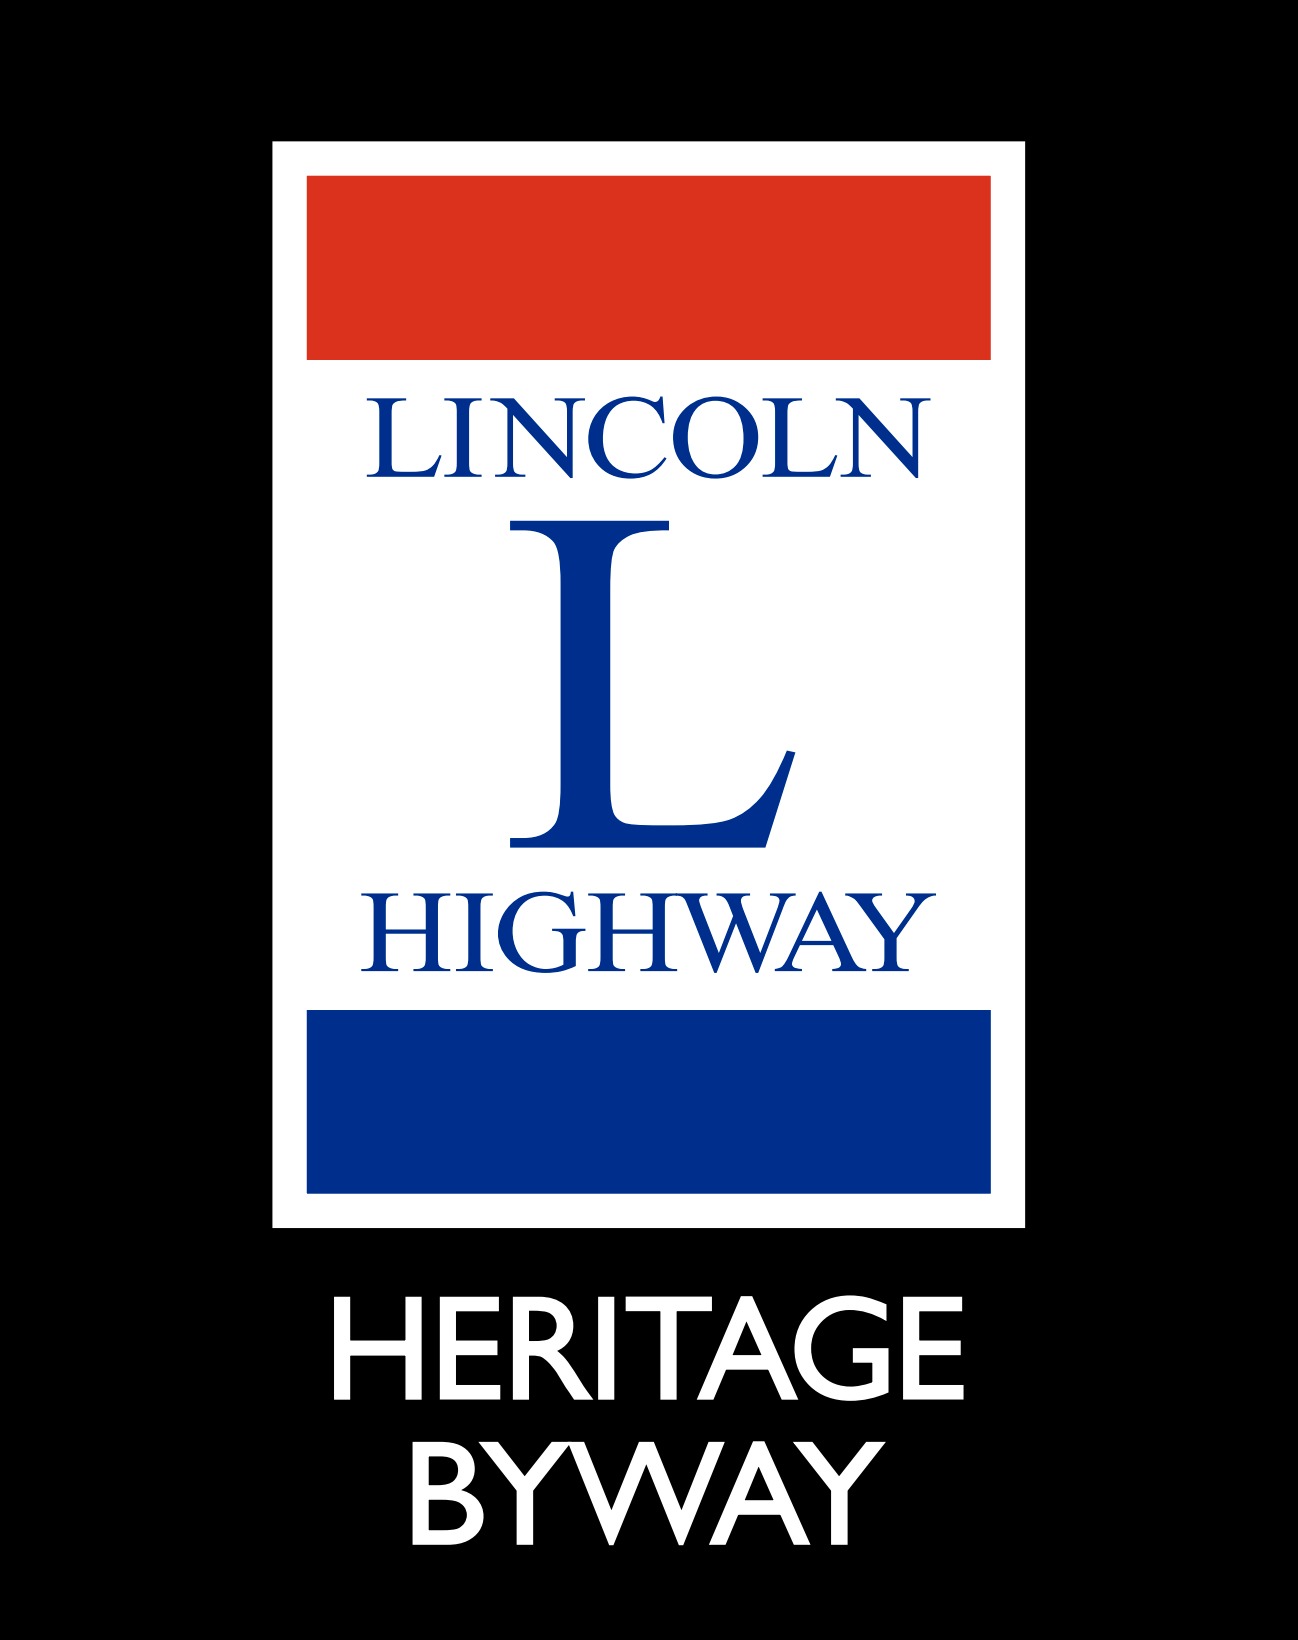 Lincoln Highway Heritage Byway